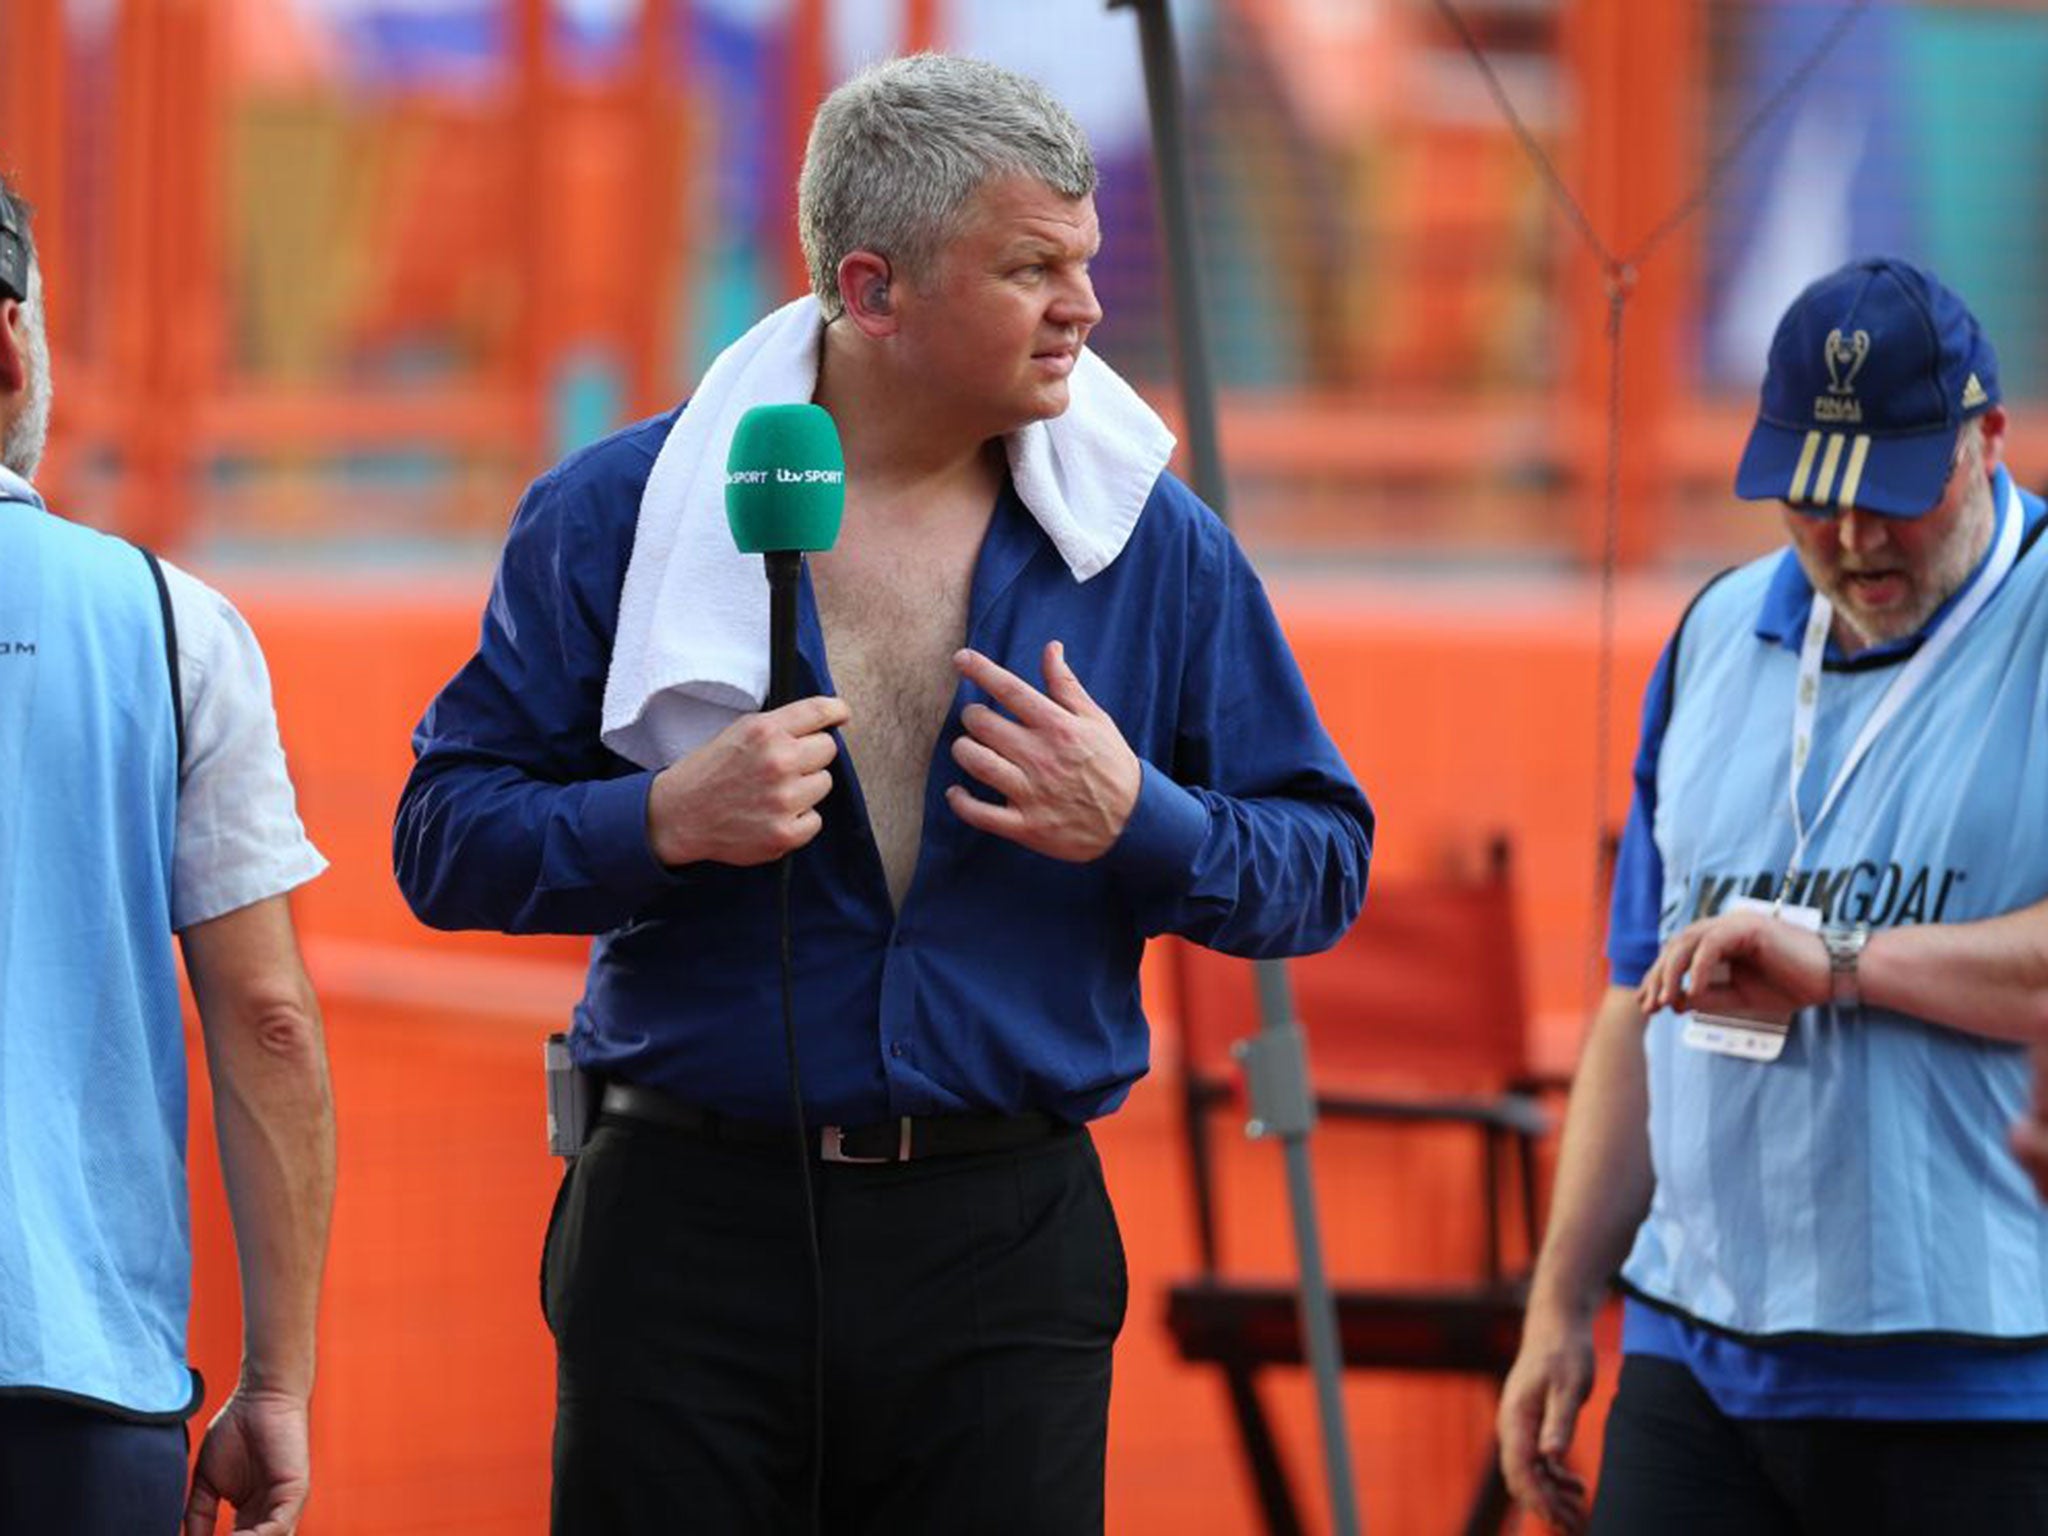 Chest the job: ITV’s World Cup anchor Adrian Chiles – never knowingly under-Brummied